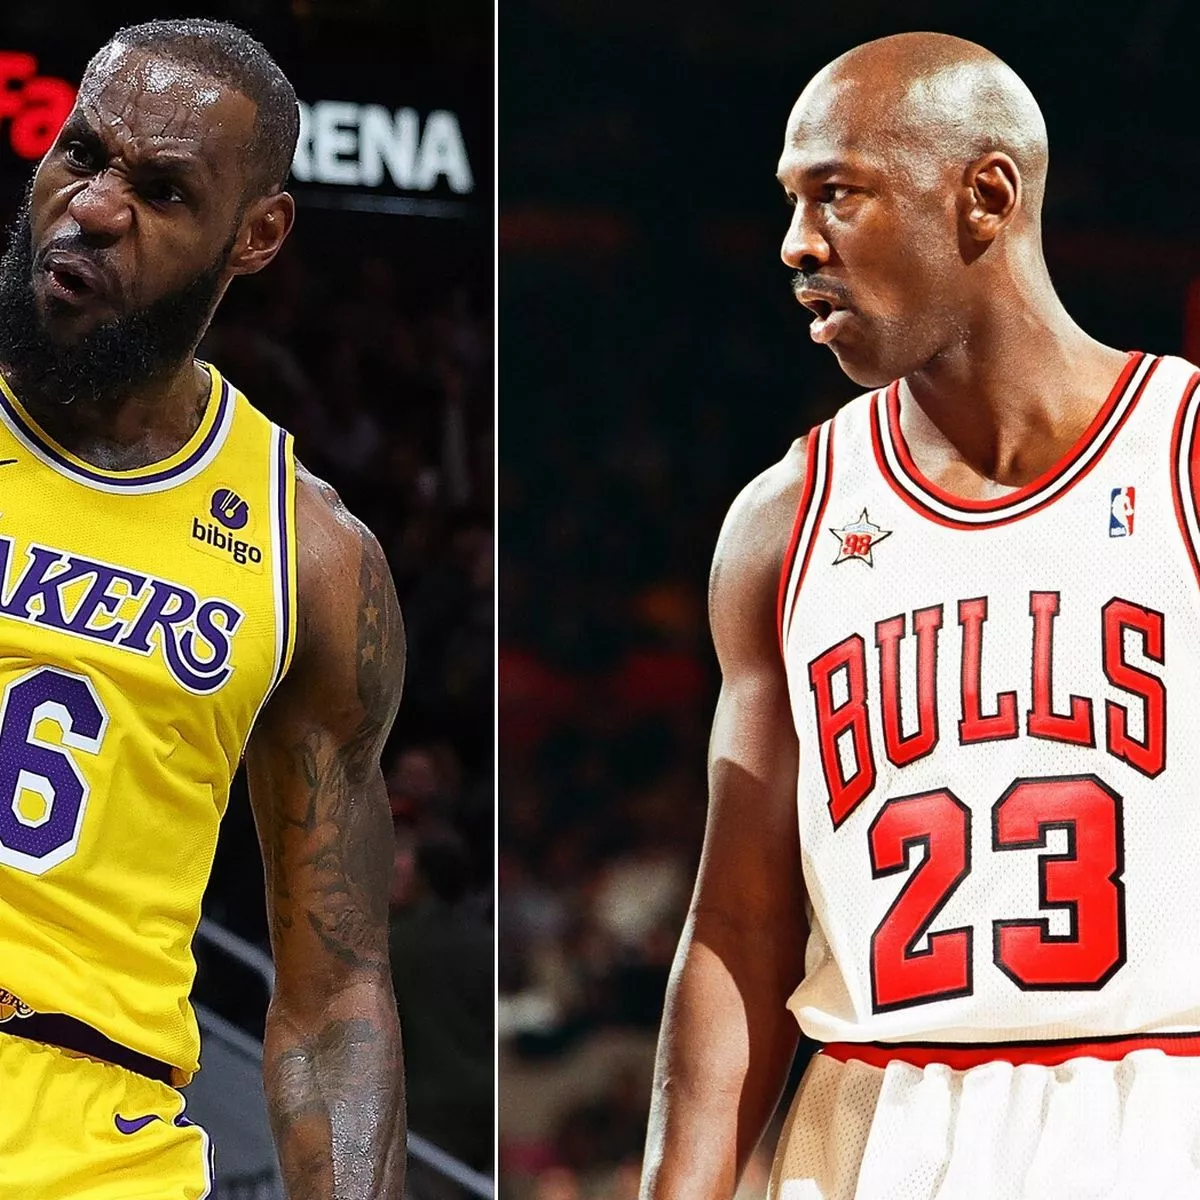 Which NBA team did Michael Jordan defeat in the 1992 NBA Finals?